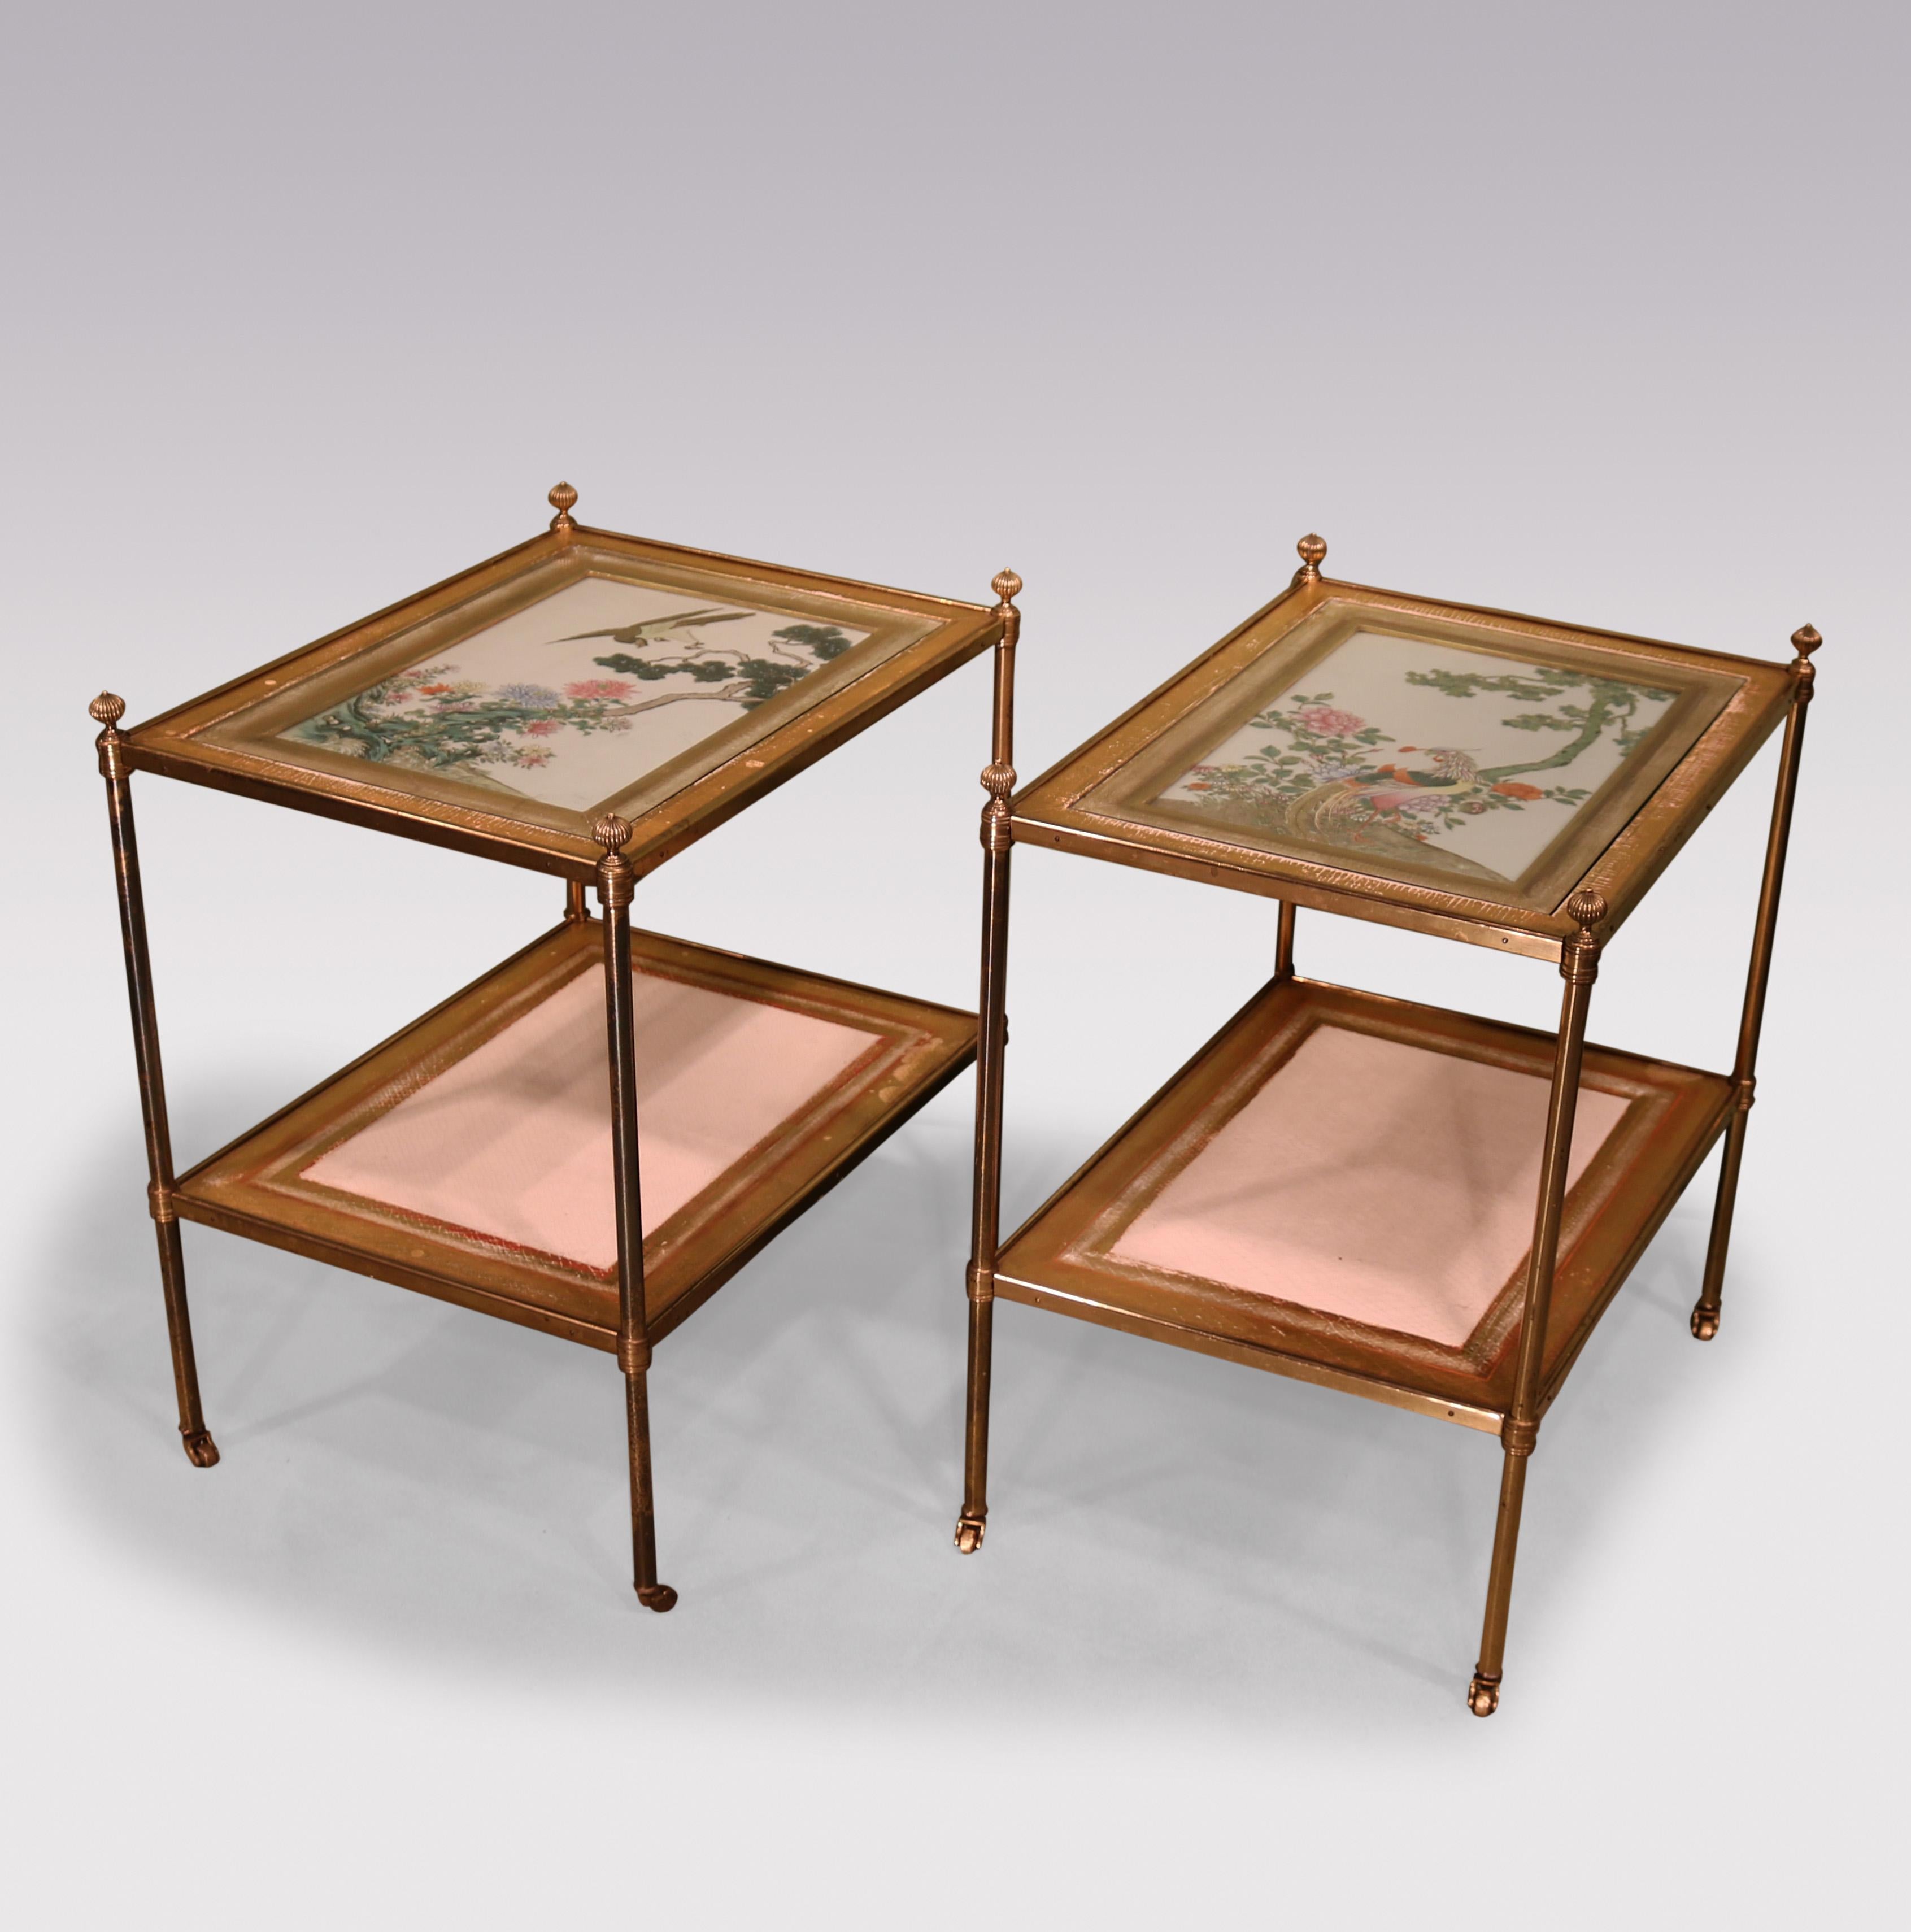 A pair of “Mallett Etageres” 2-tier Side Tables, having mid-19th century Famille Rose plaques depicting peonies, trees & exotic birds.